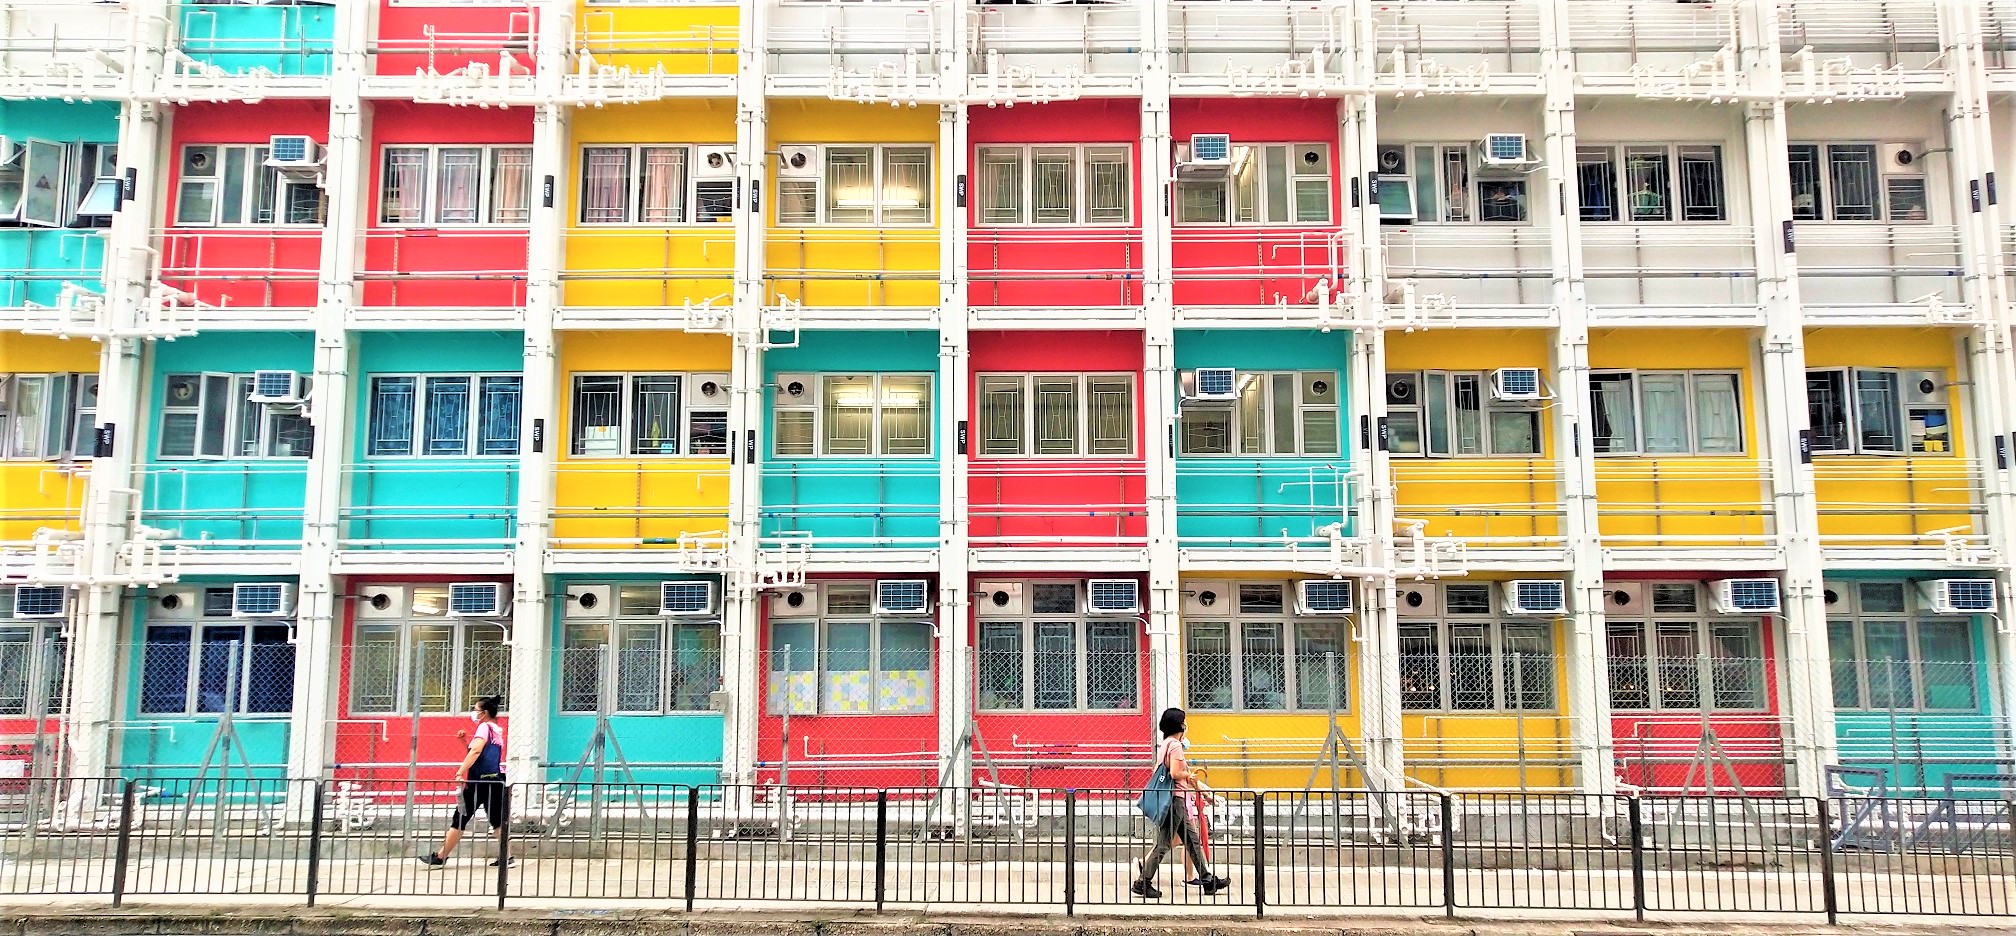 A colorful new transitional housing block shows Western travelers Chinese idiom and Hong Kong old saying 